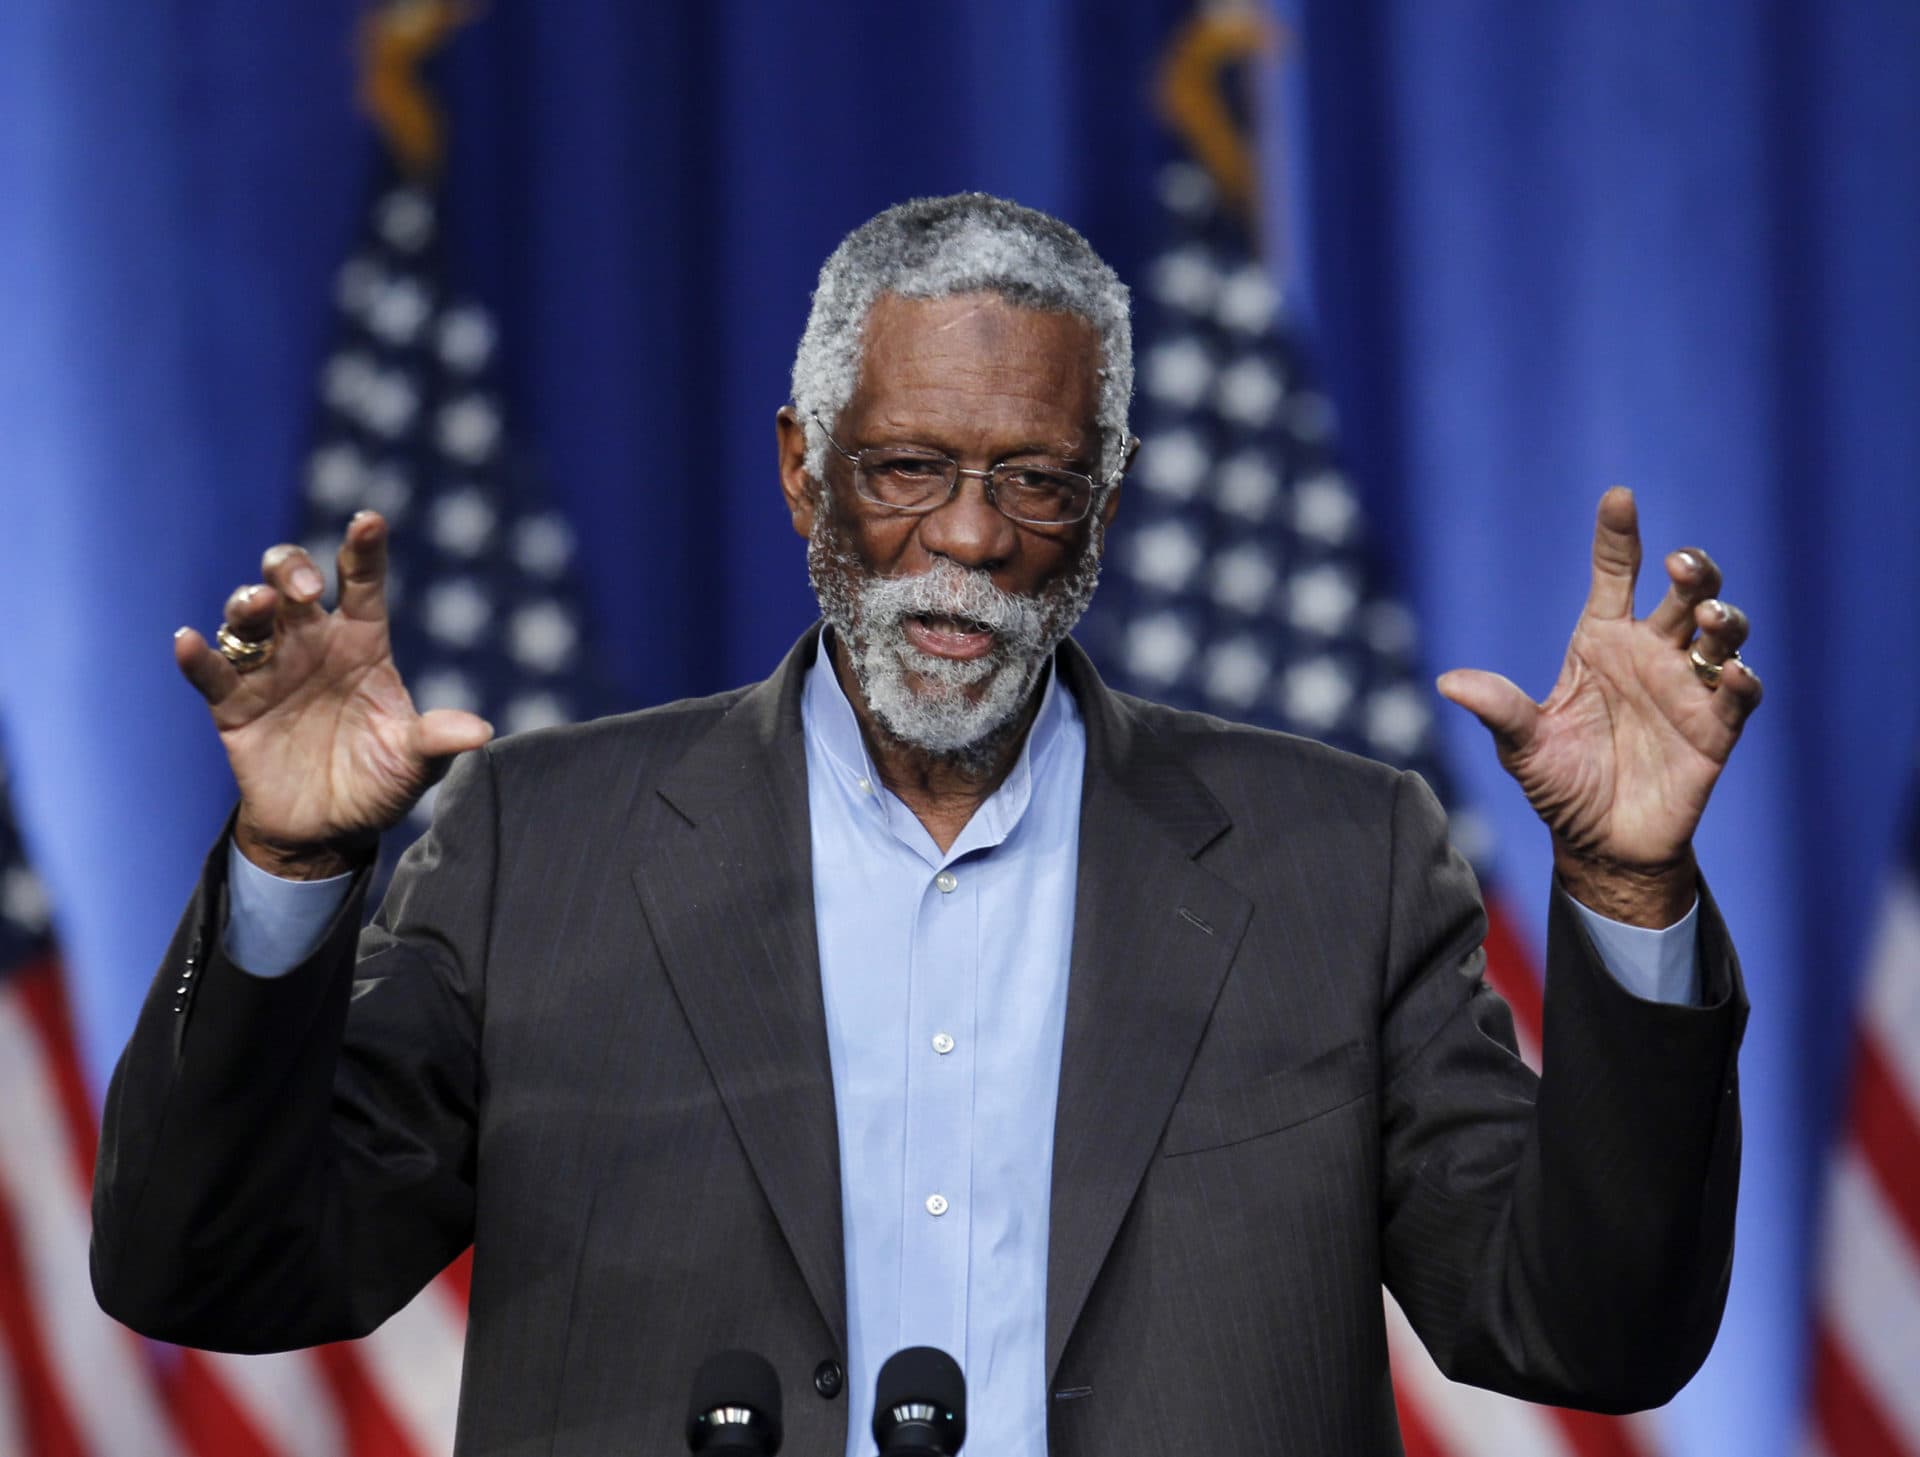 Bill Russell addresses an audience during a campaign fundraising event, in Boston, May 18, 2011. (Steven Senne/AP)